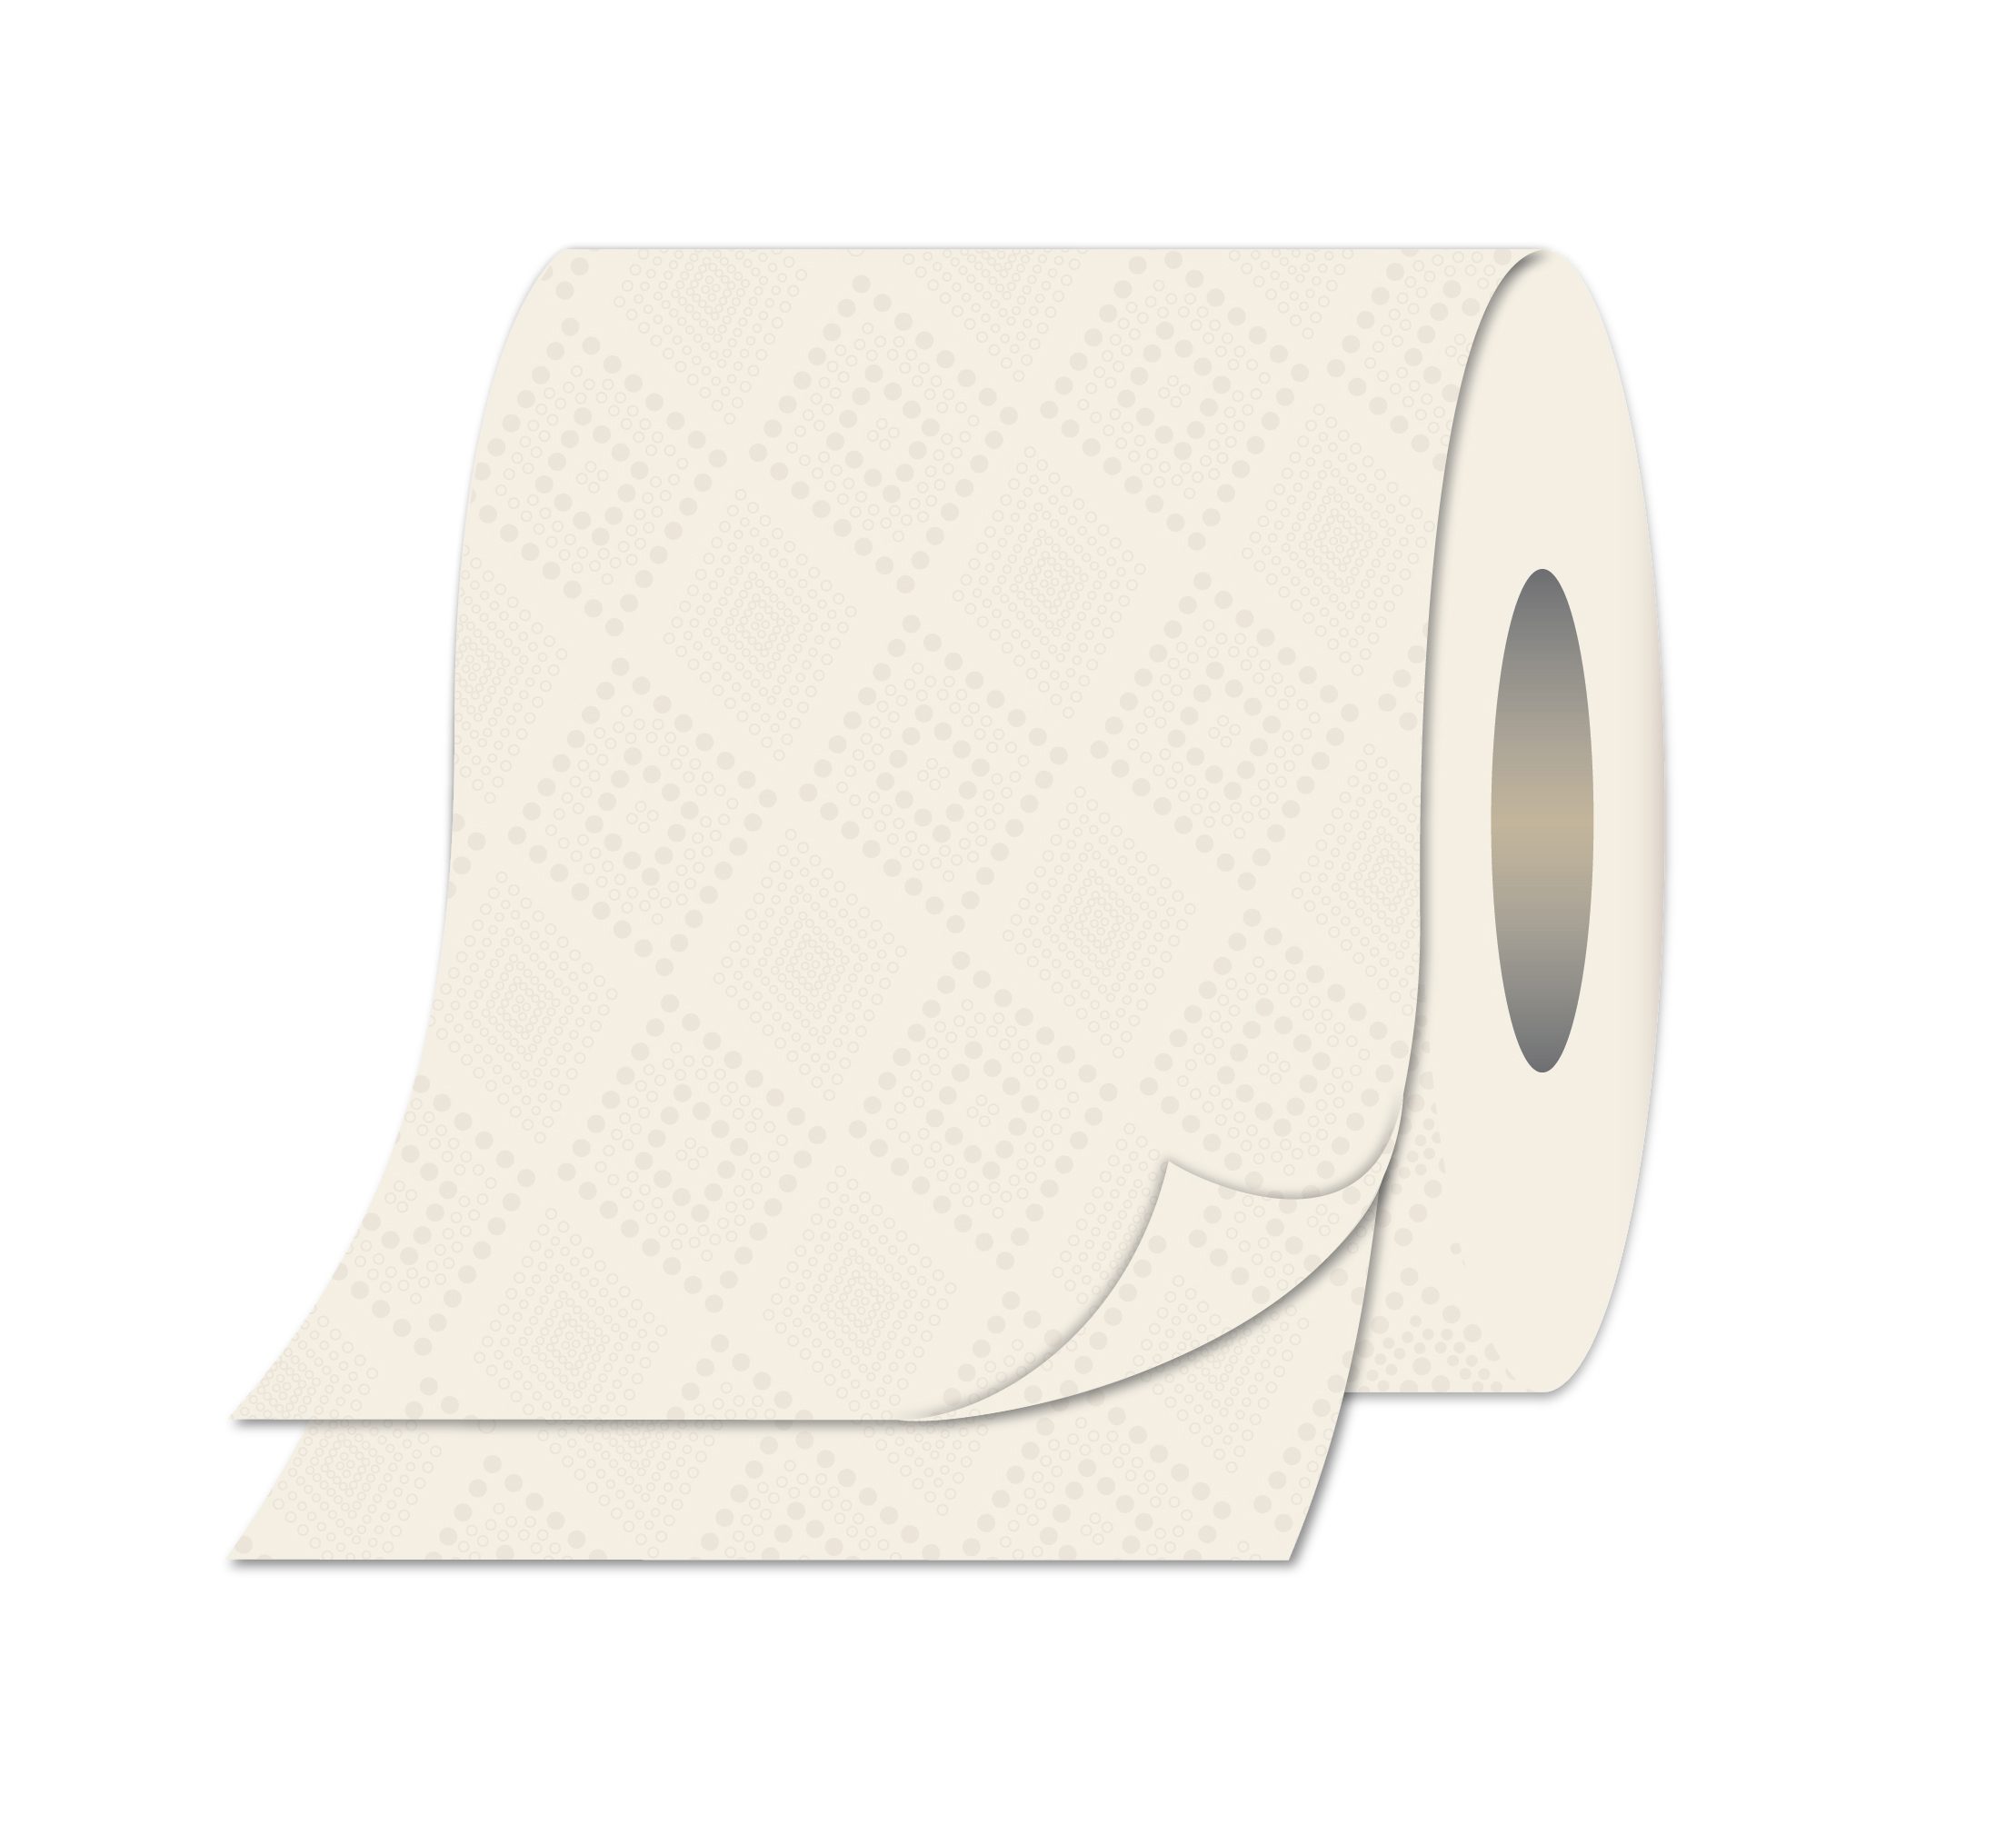 Bamboo Unbleached Eco Friendly 2ply Toilet Paper – 10 Packs of 4 (40 Rolls)